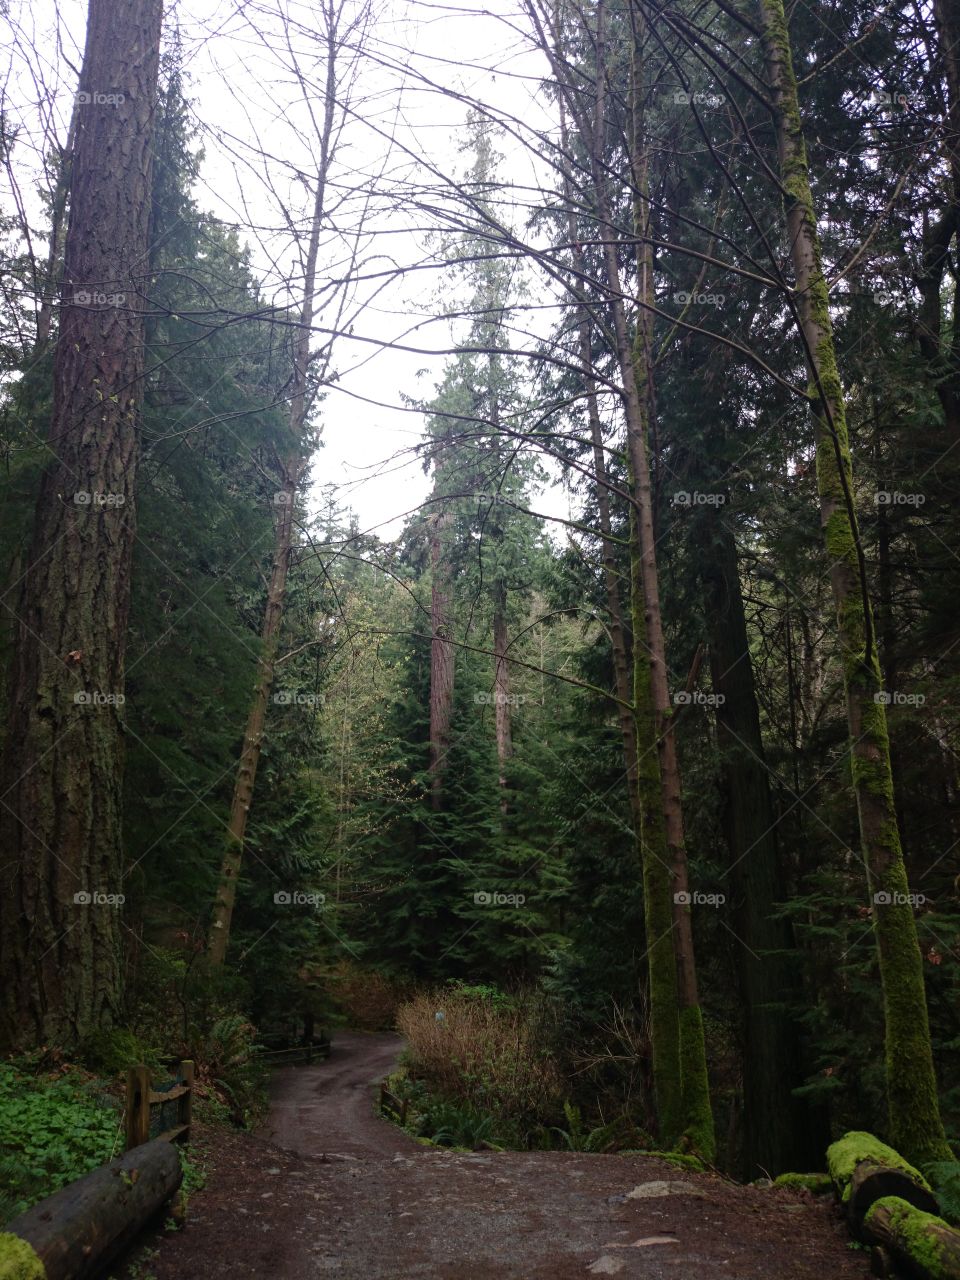 Road in the forest. north vancouver, british columbia canada march 2015 